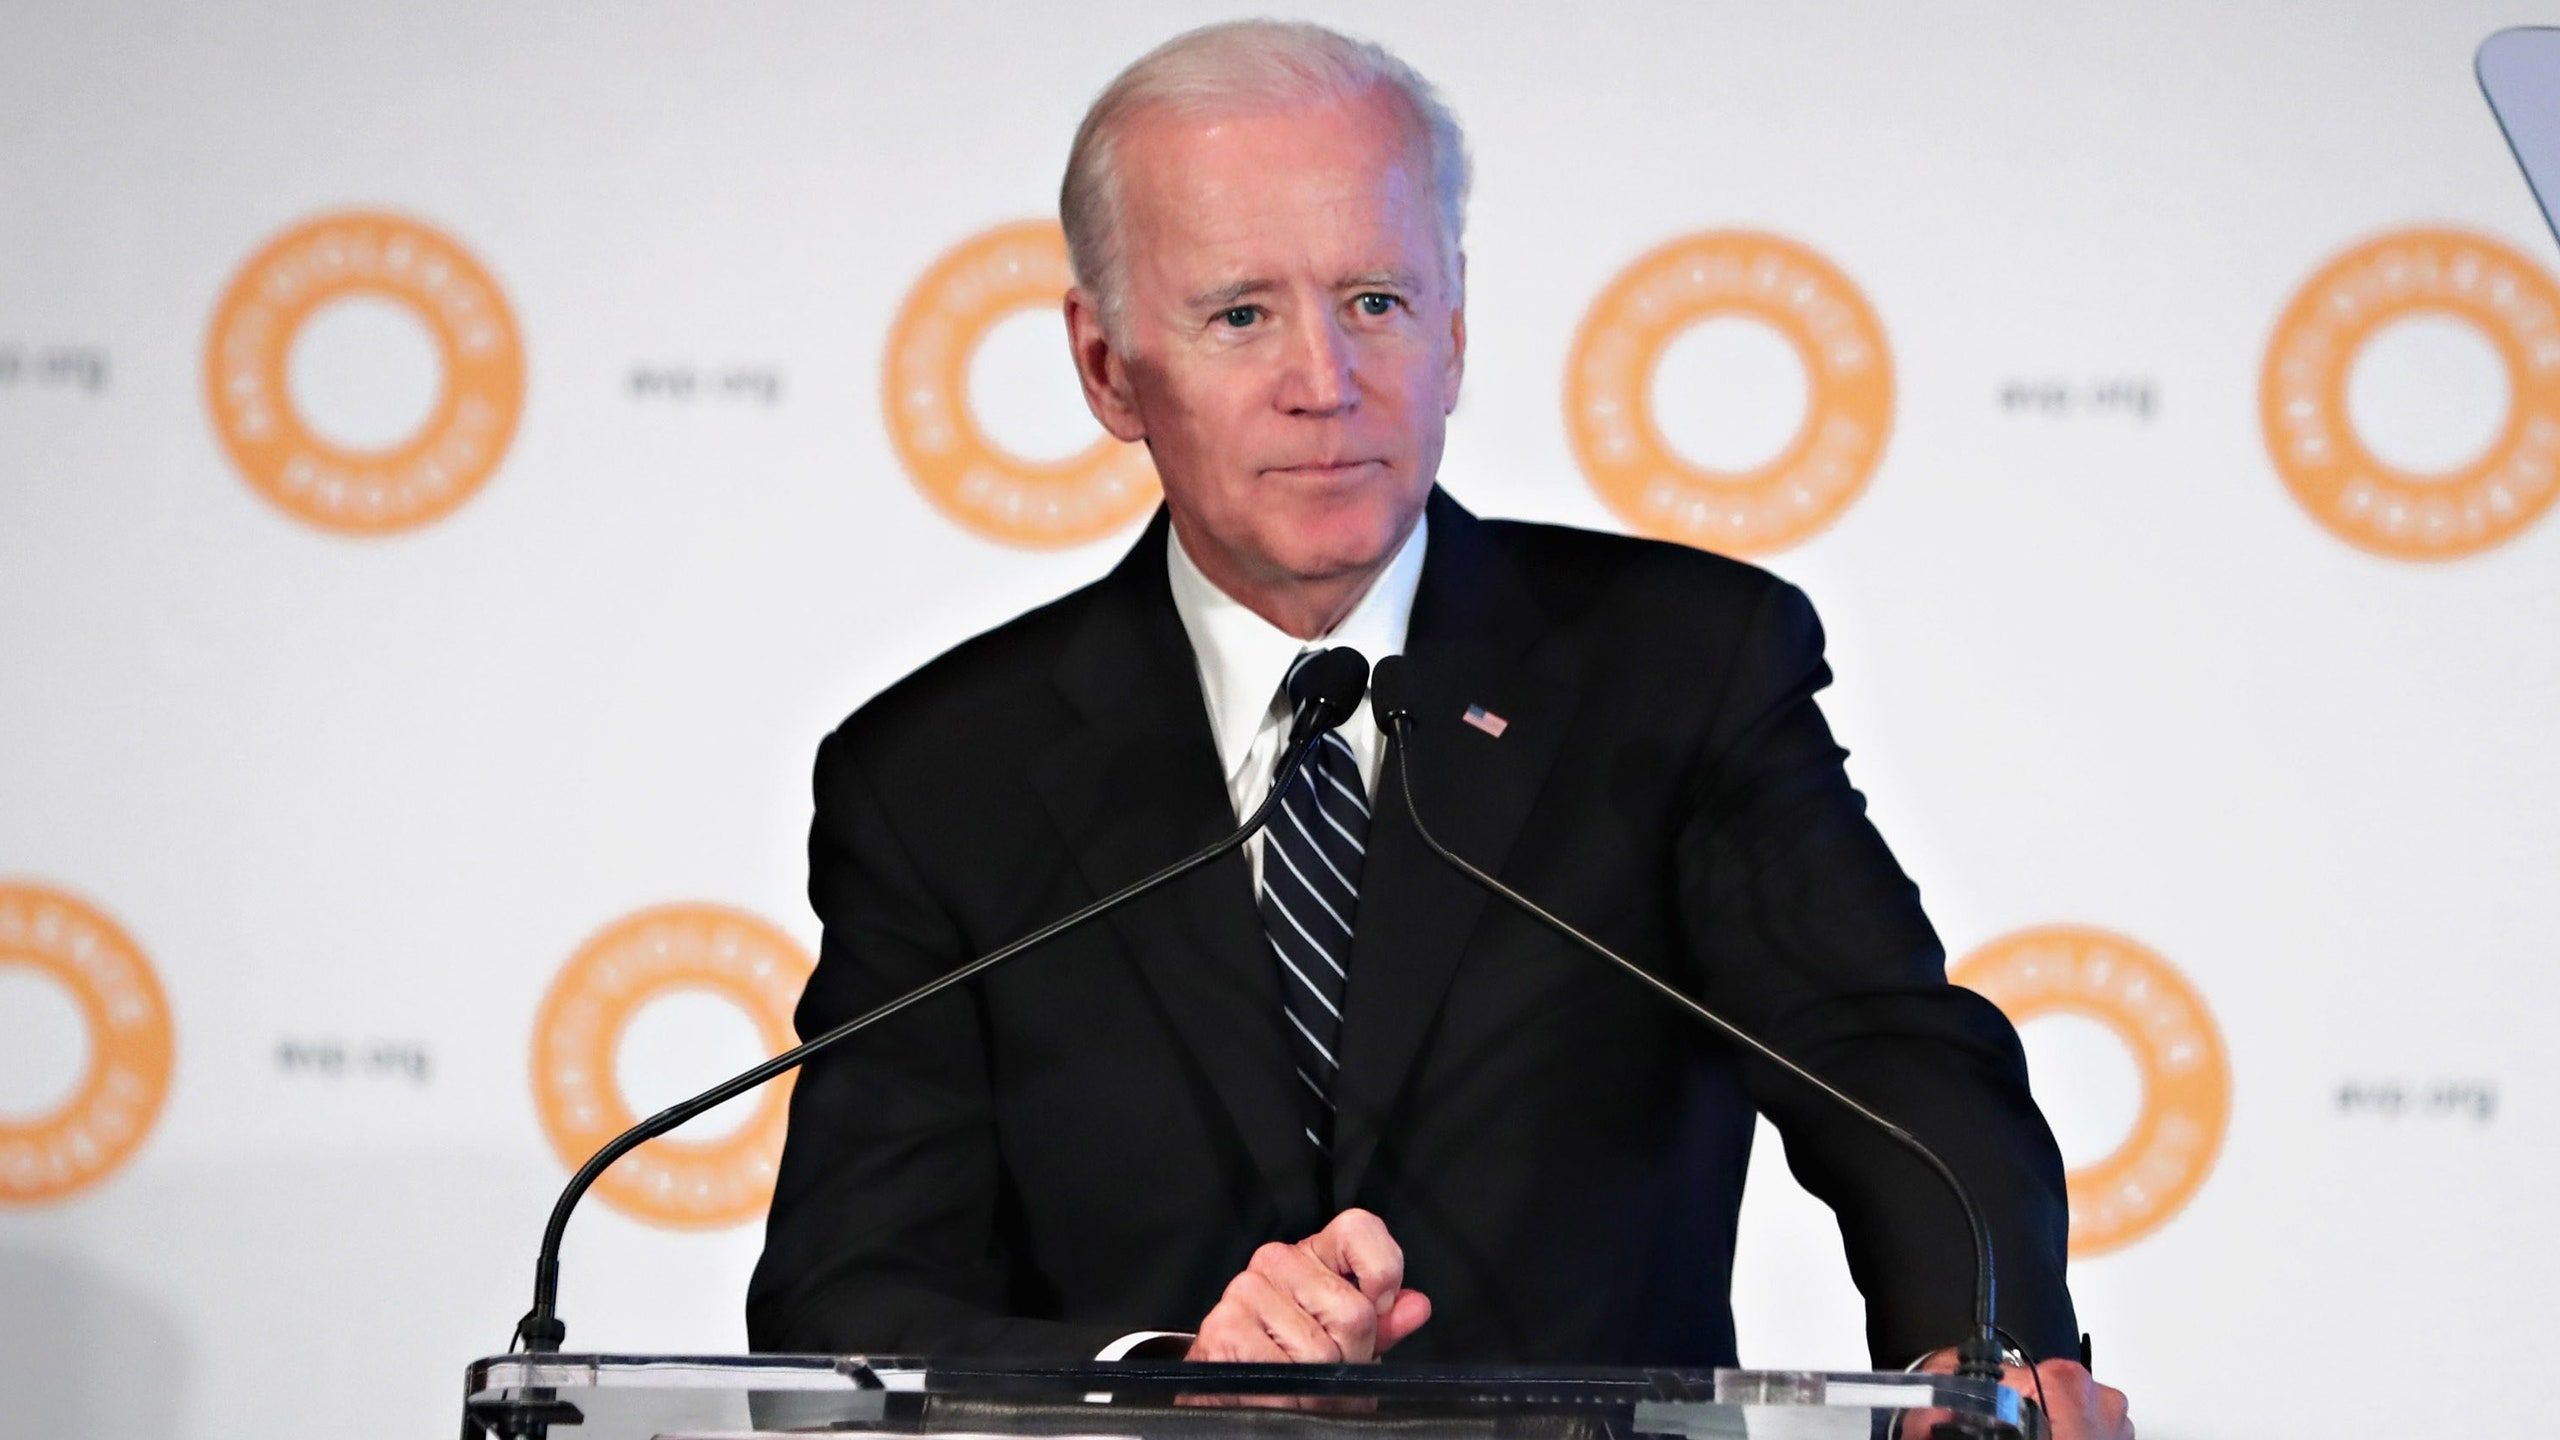 Joe Biden Opened Up About How He Copes With Grief